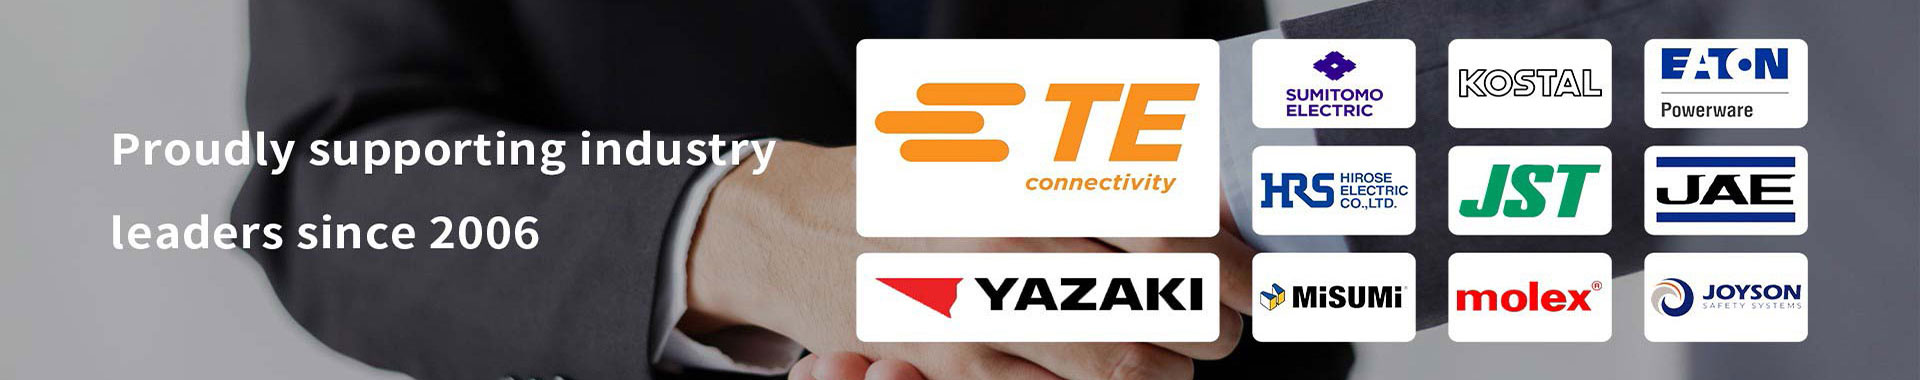 Yize mould cooperative customers